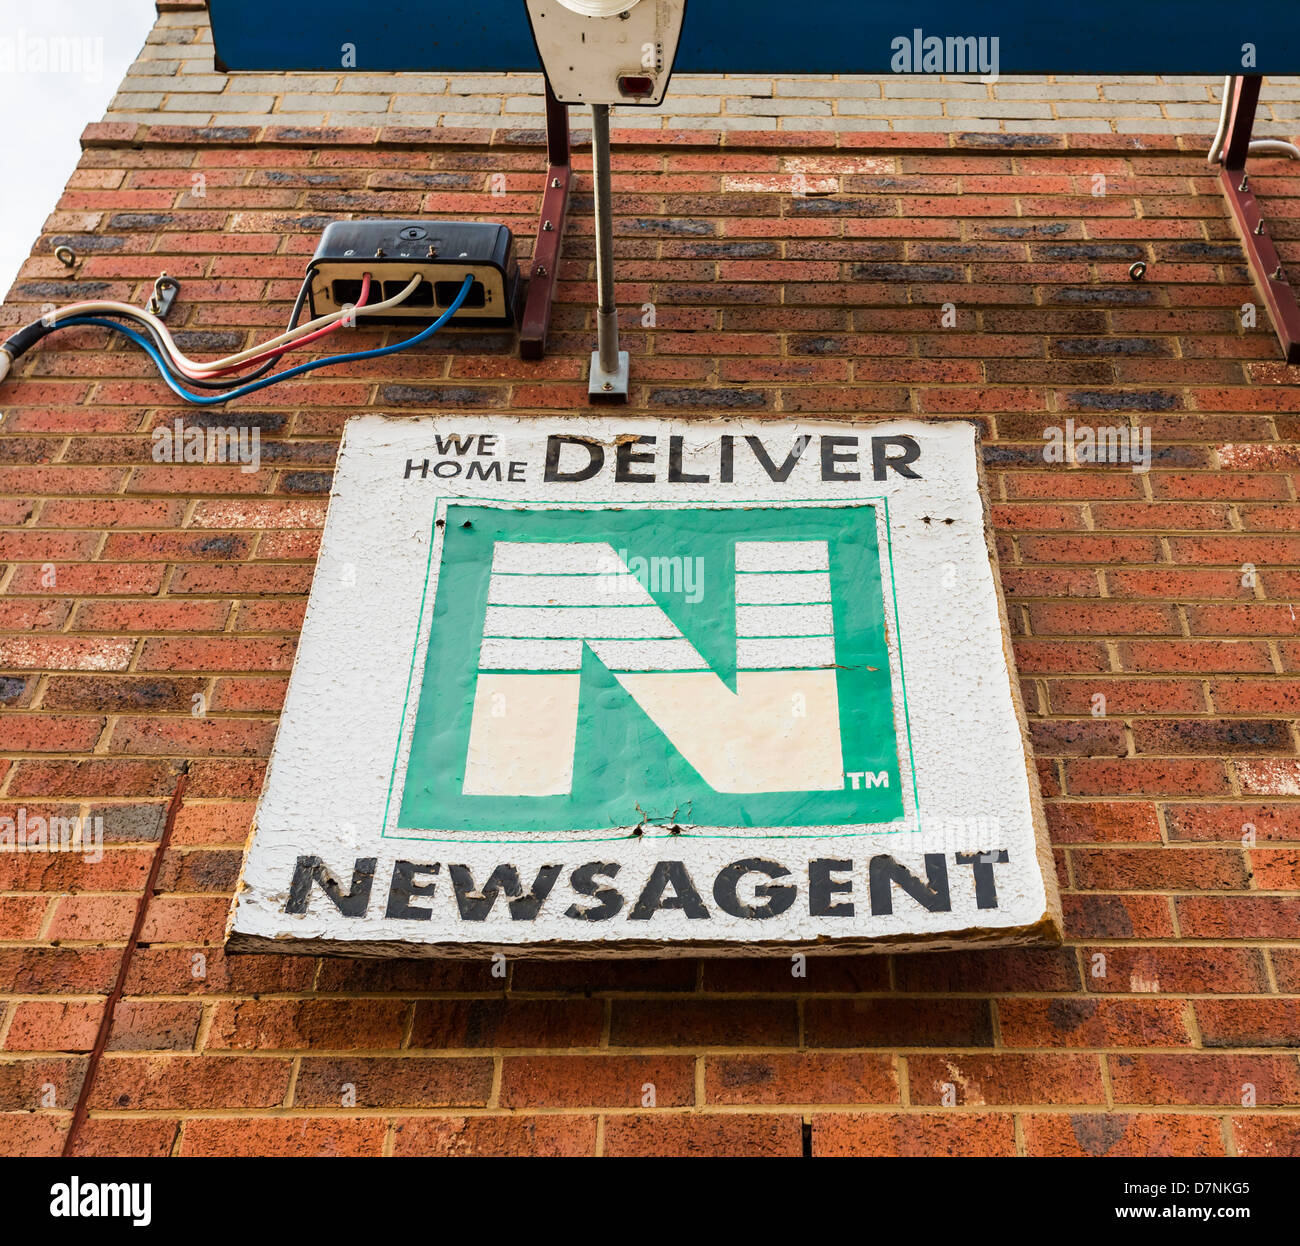 Dilapidated newsagent sign advertising home delivery. Conceptual image suggesting changing media  to non-paper alternatives Stock Photo